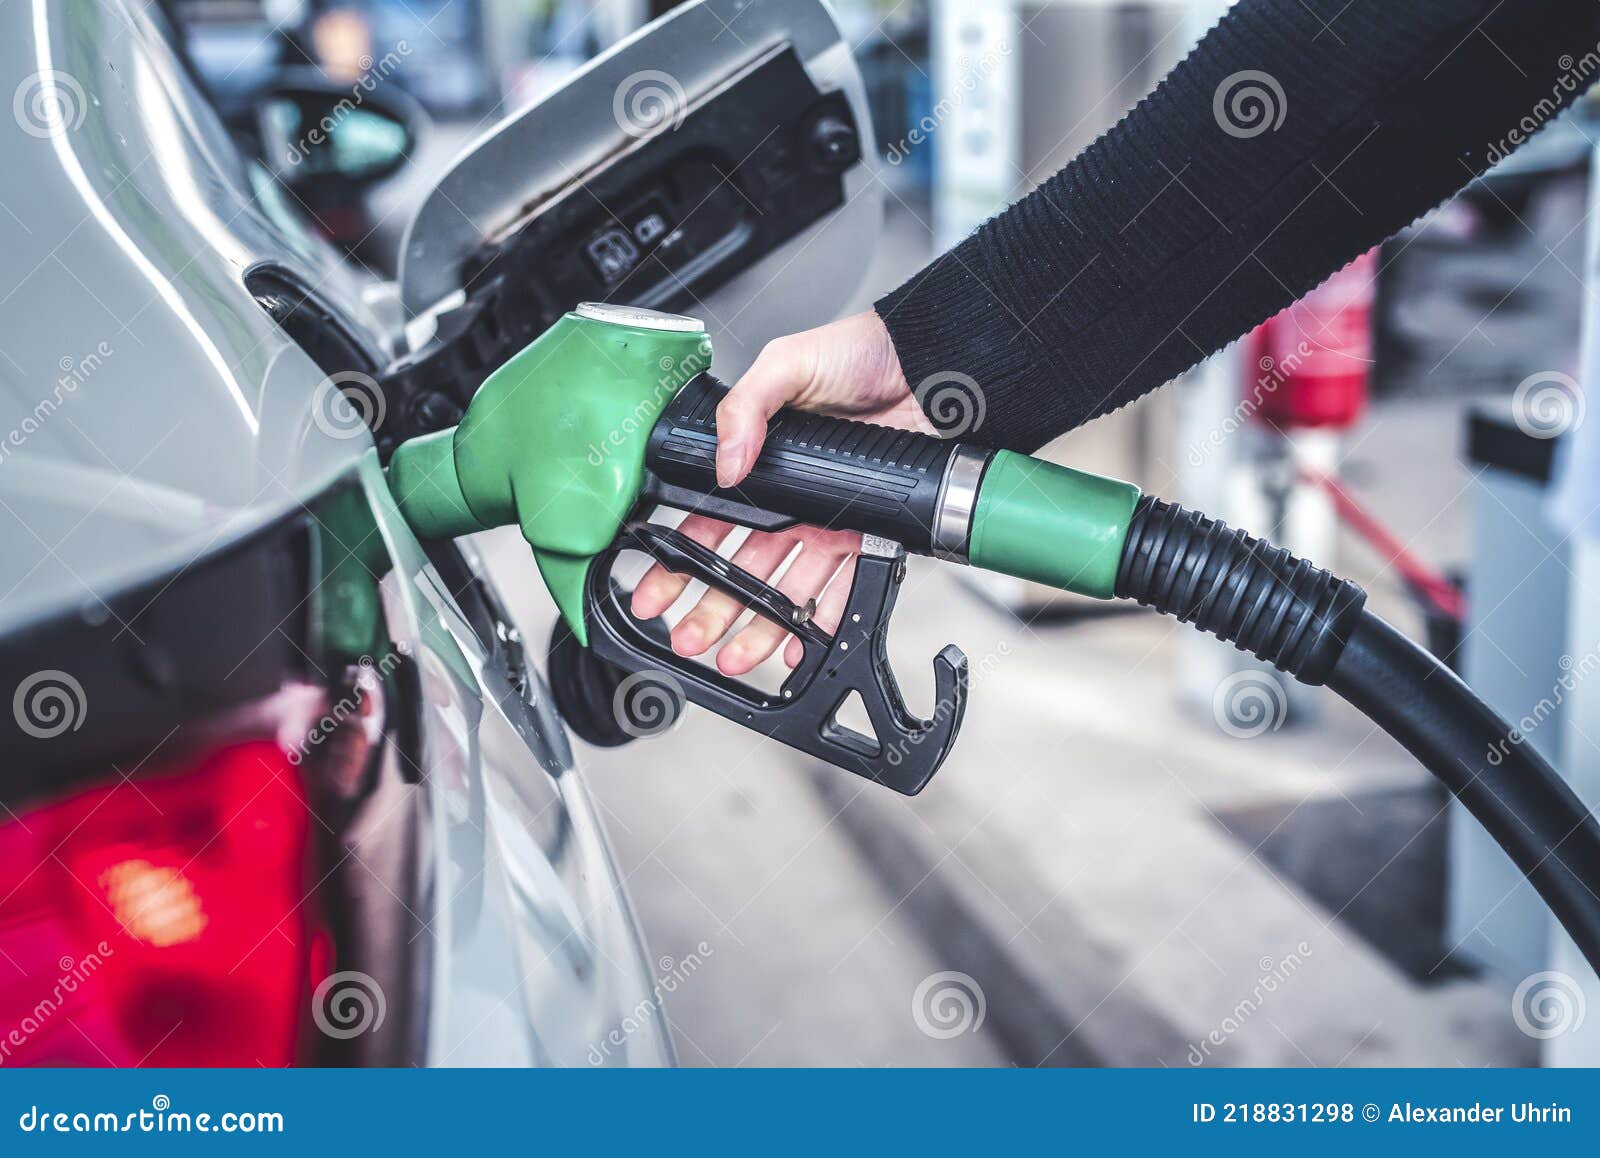 woman pumping gasoline fuel in car at gas station.